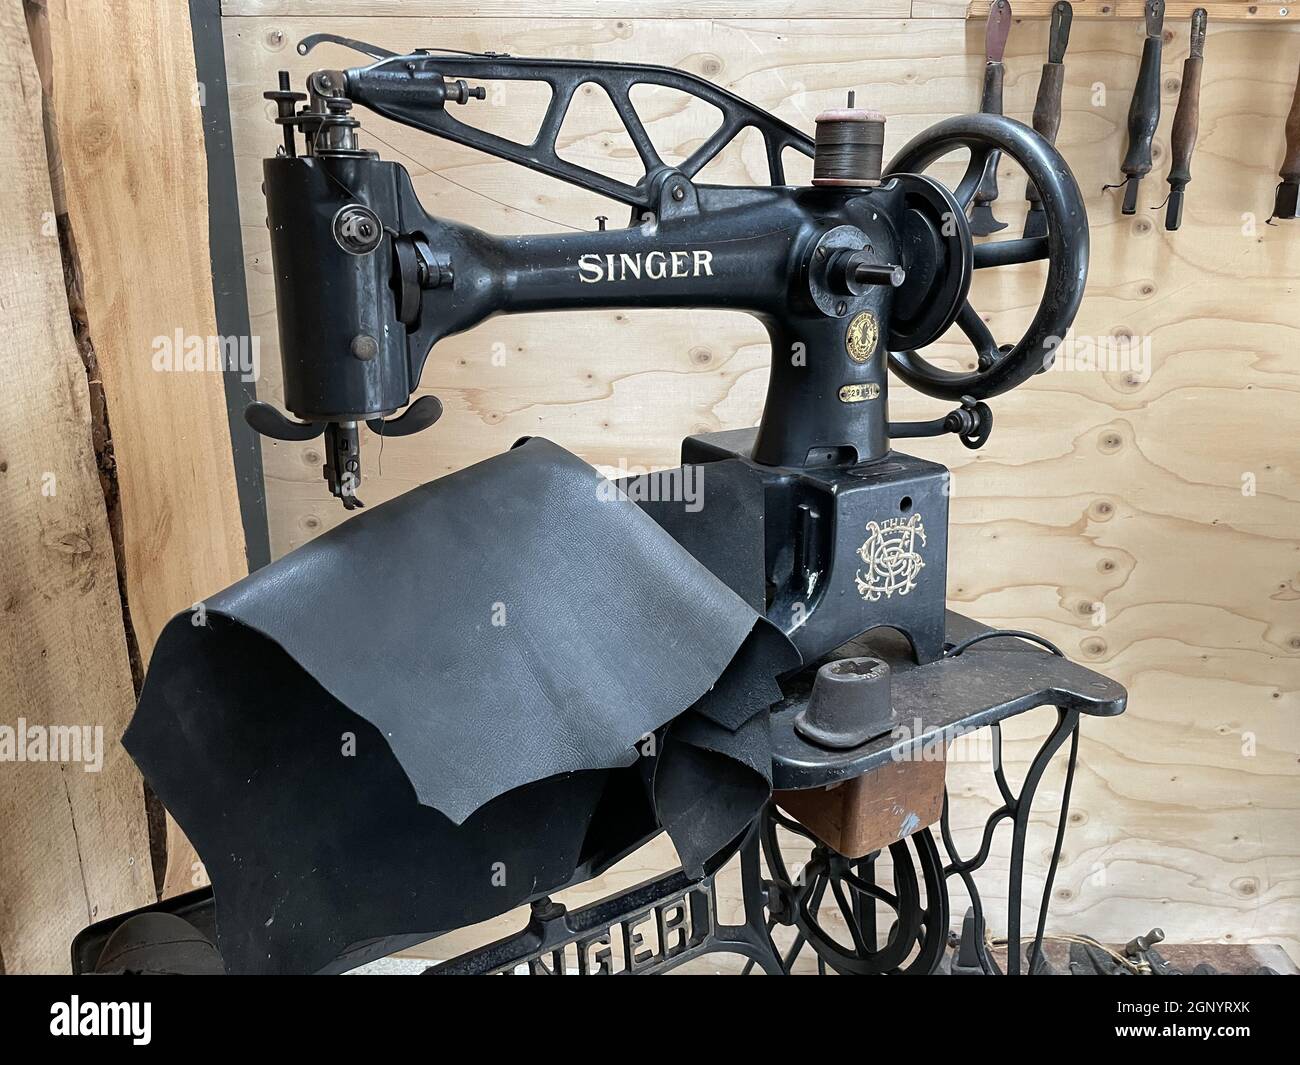 ACHTERHOEK, NETHERLANDS - Aug 28, 2021: An old black antique Singer sewing machine on stand Stock Photo